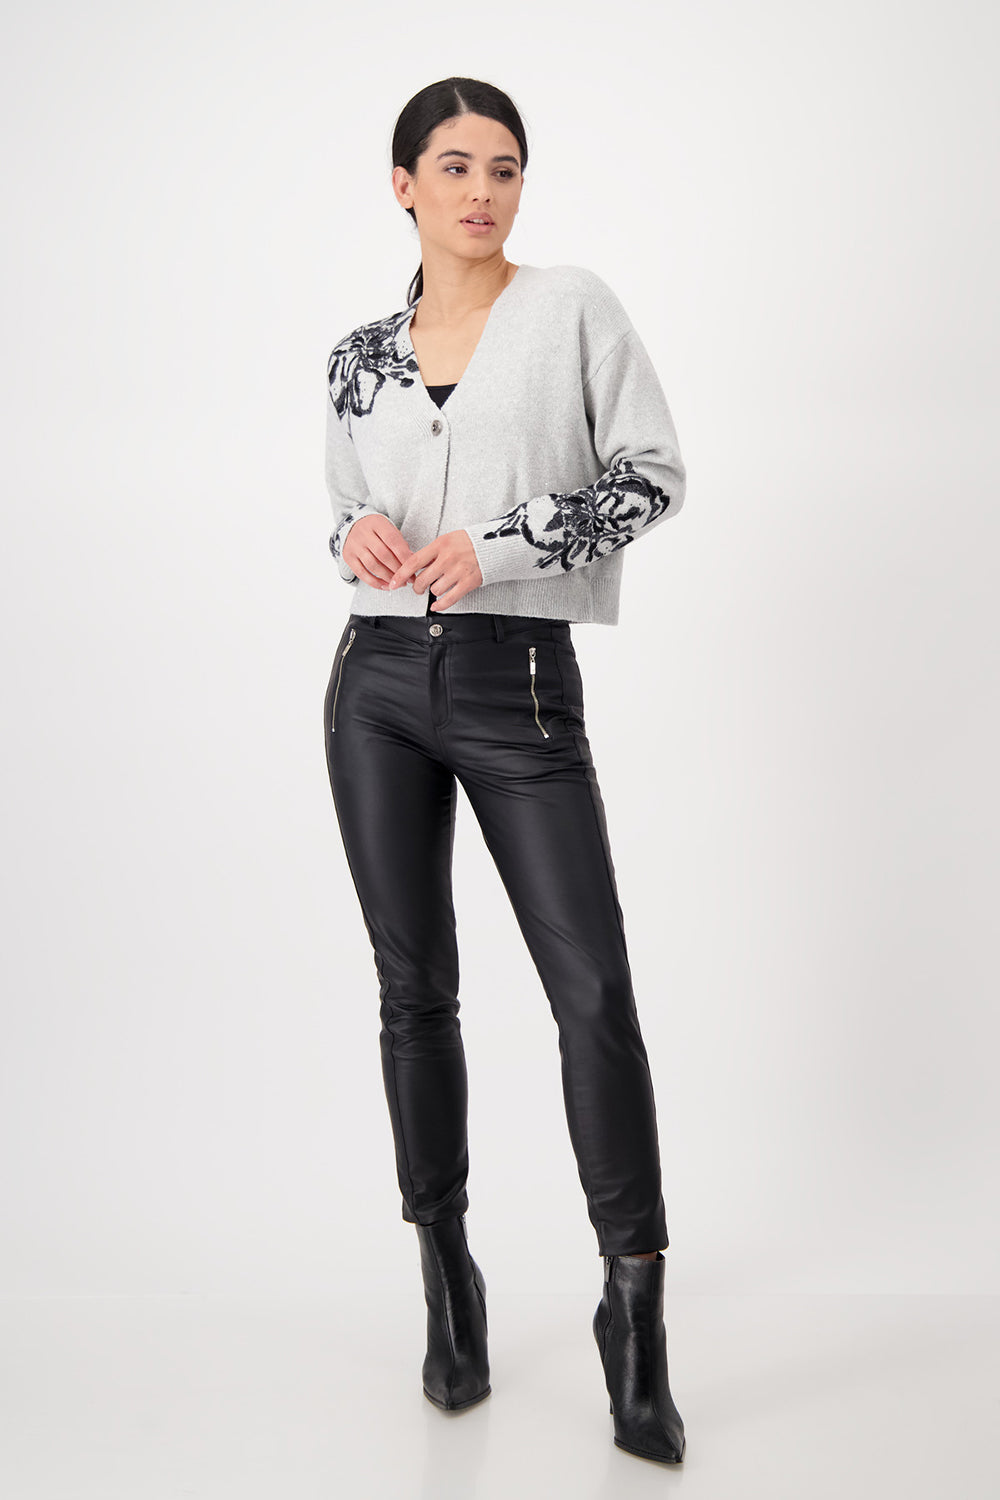 Monari Printed Jacket with Embellishment 807498 - Pre Order April Delivery